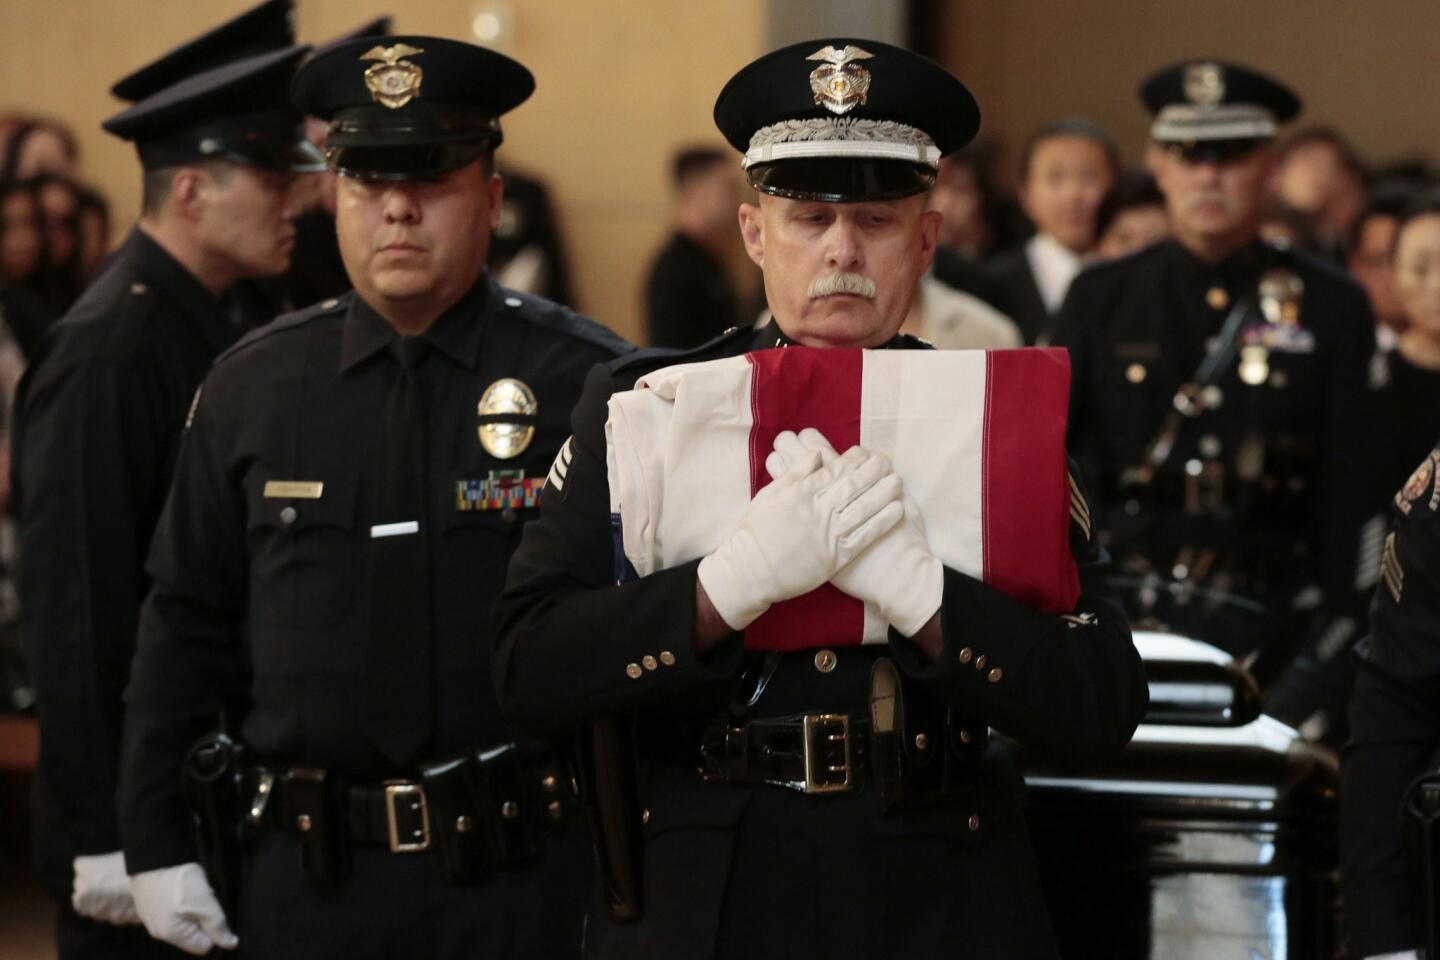 Sergeant holds flag at service